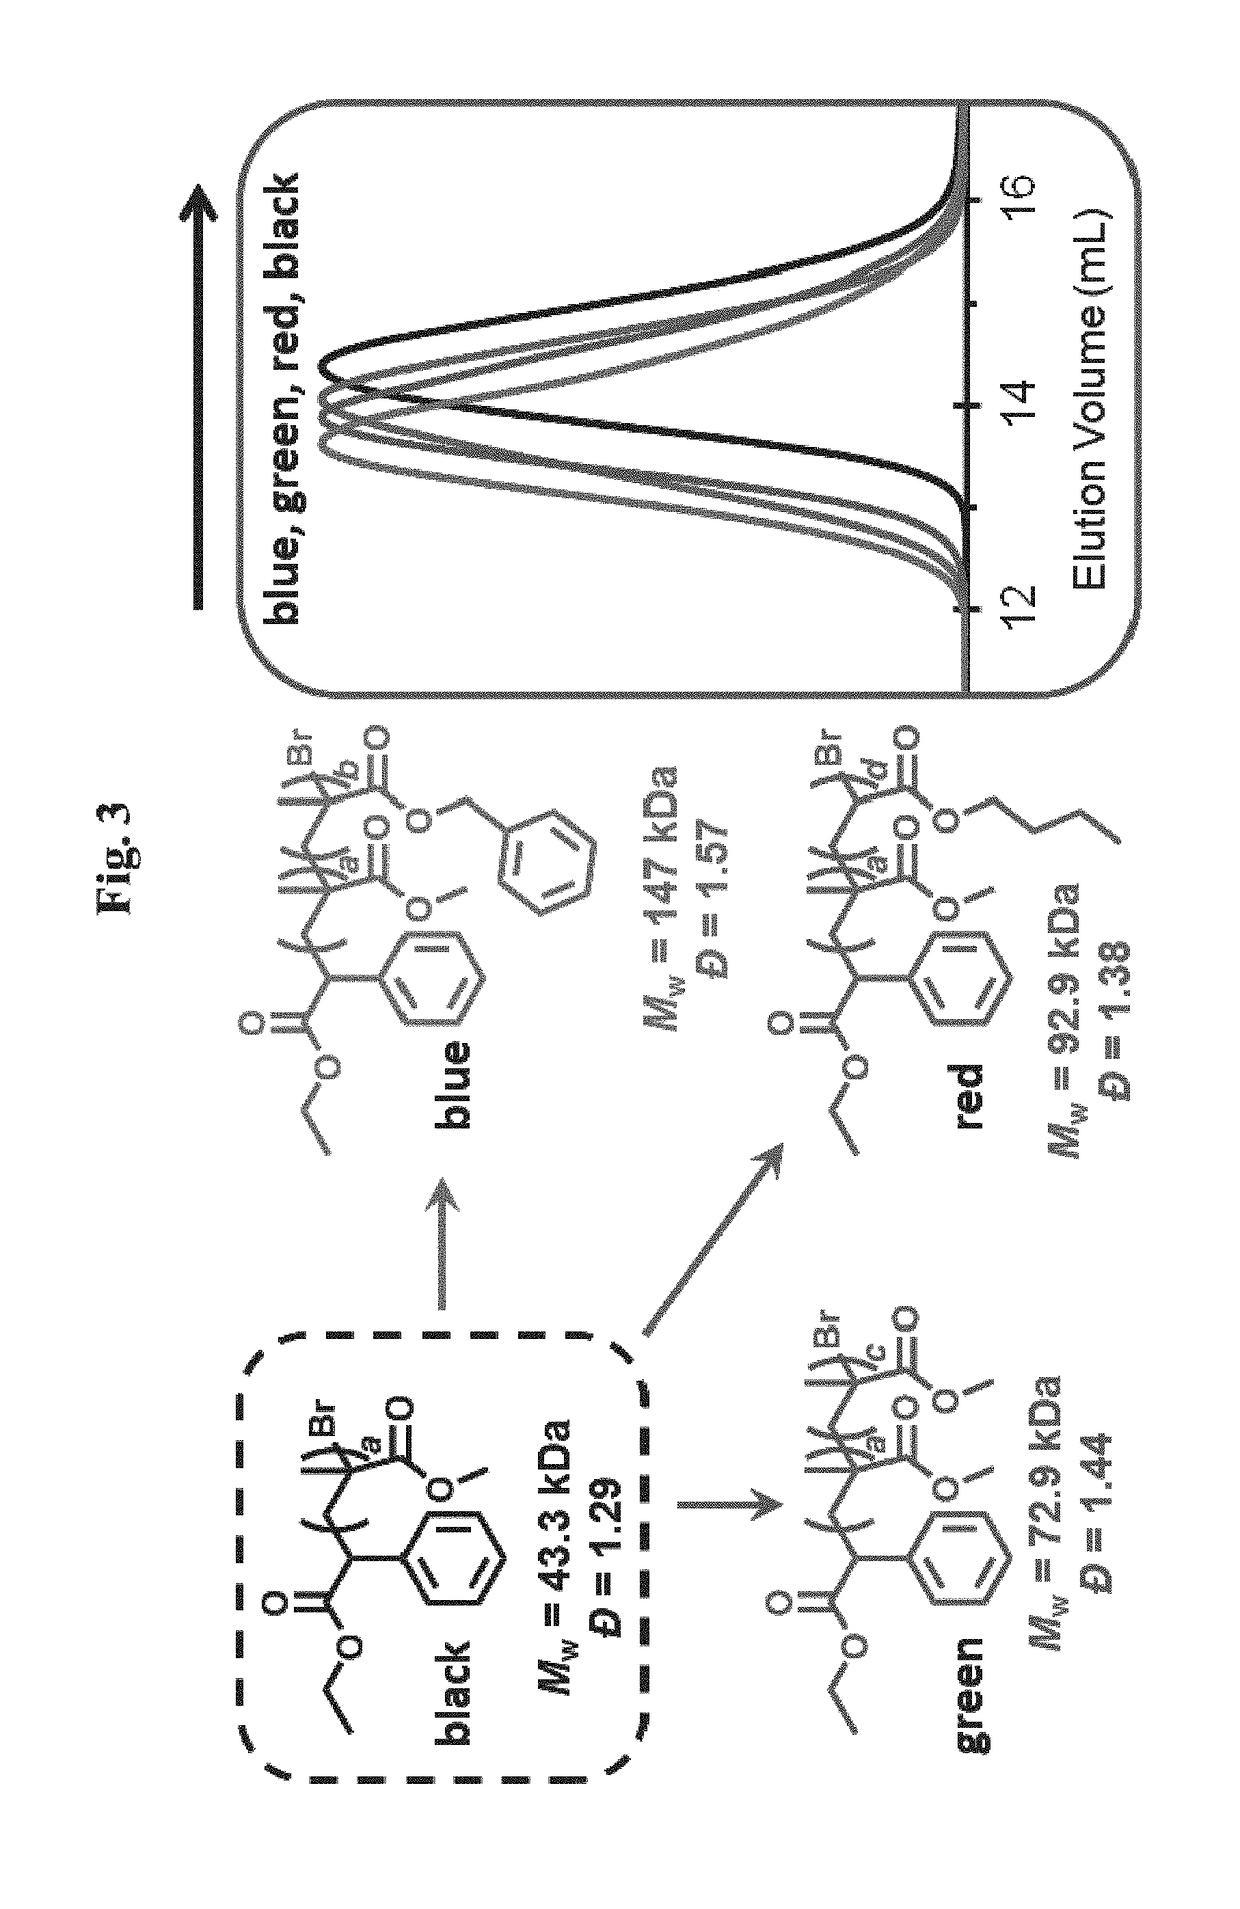 Compositions and methods of promoting organic photocatalysis